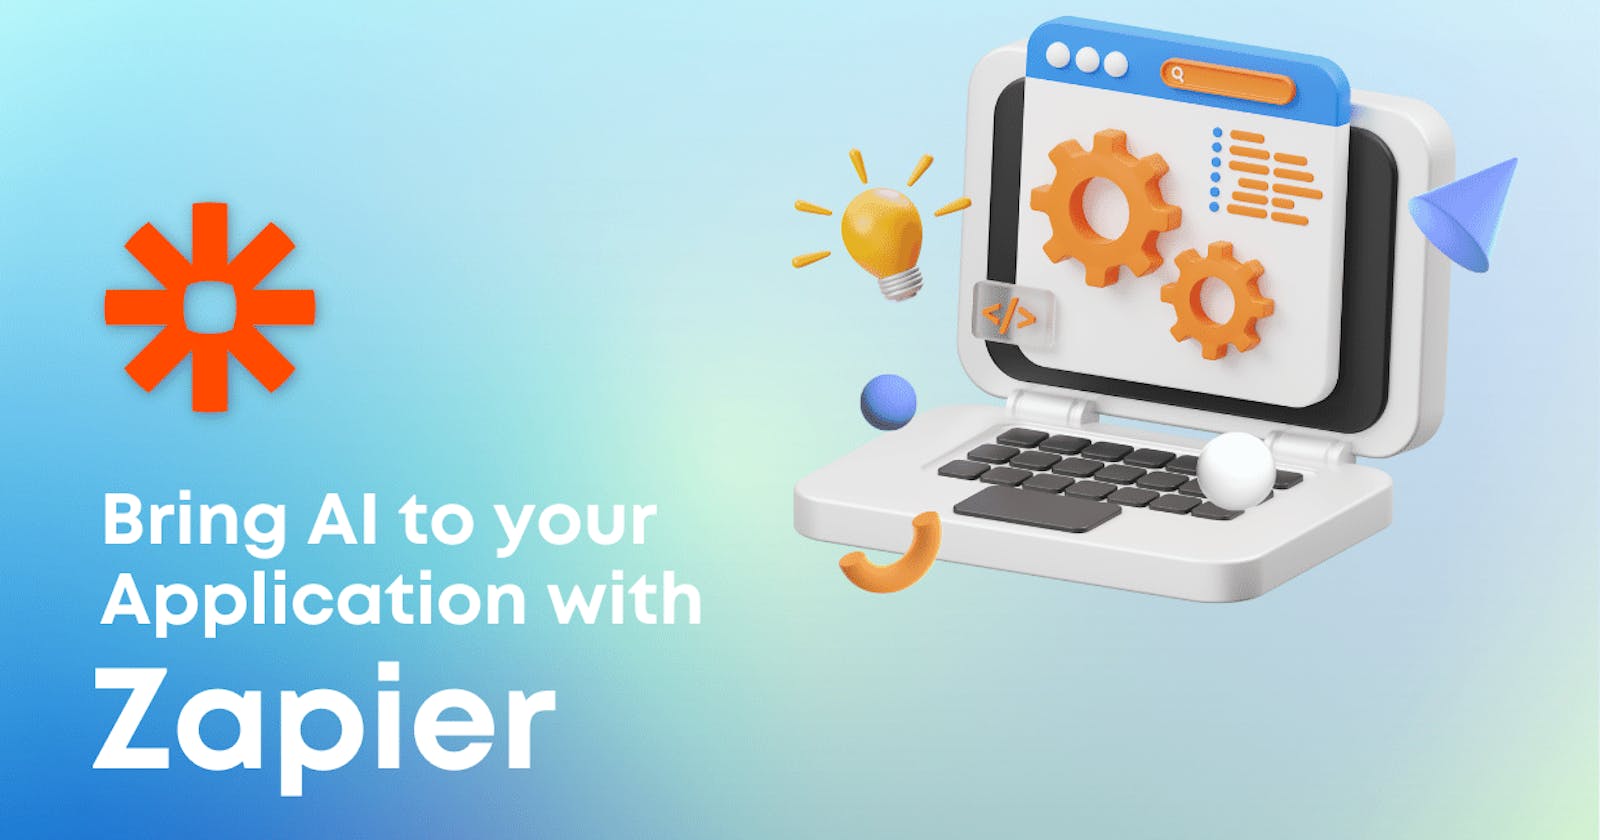 A Step-by-Step Guide to bring AI to your App using Zapier